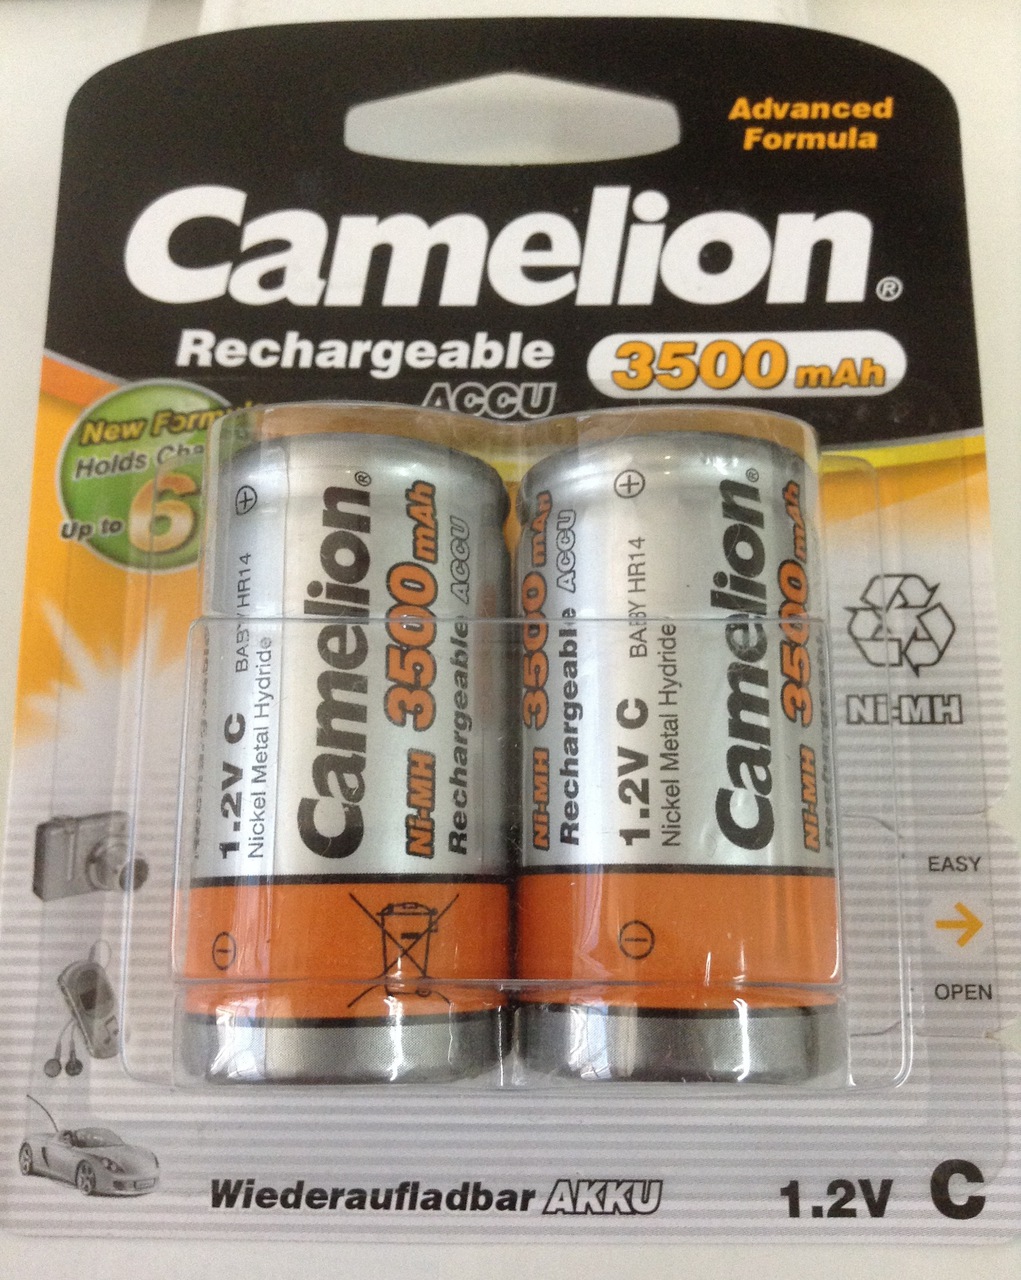 Camelion Advanced Formula C Rechargeable NiMH Batteries 3500mAh 4 Pack Retail + FREE SHIPPING!